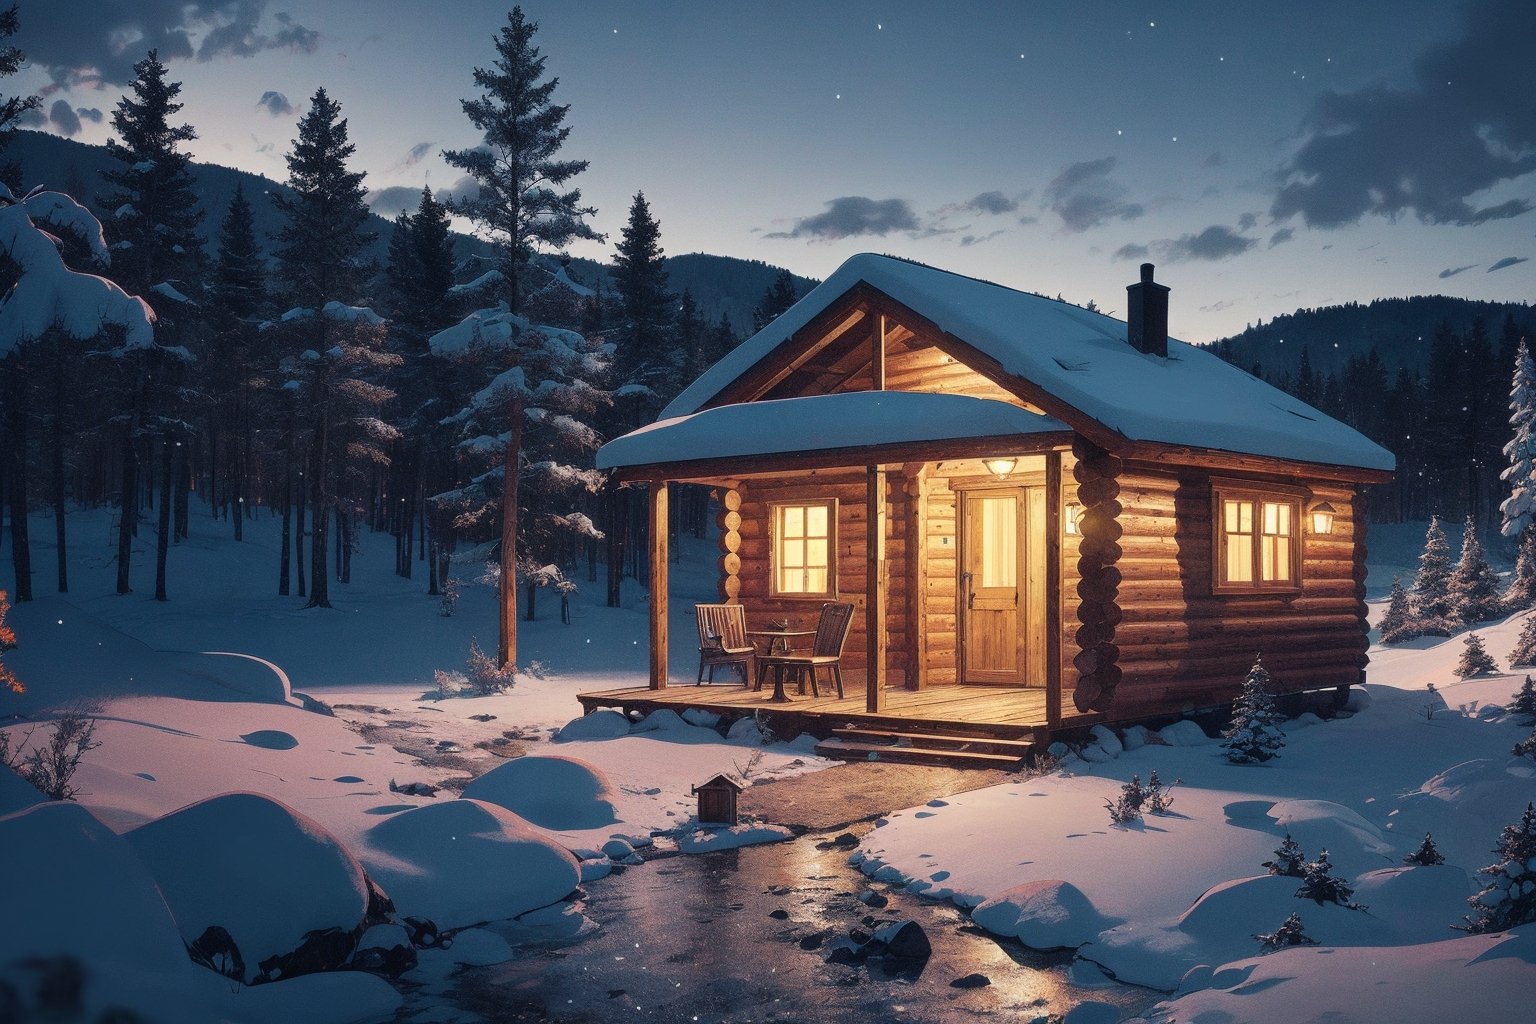 masterpeice, best quality, ultra-detail, realistic, high contract, futursitic small glowing cabin in the middle of a winter landscape